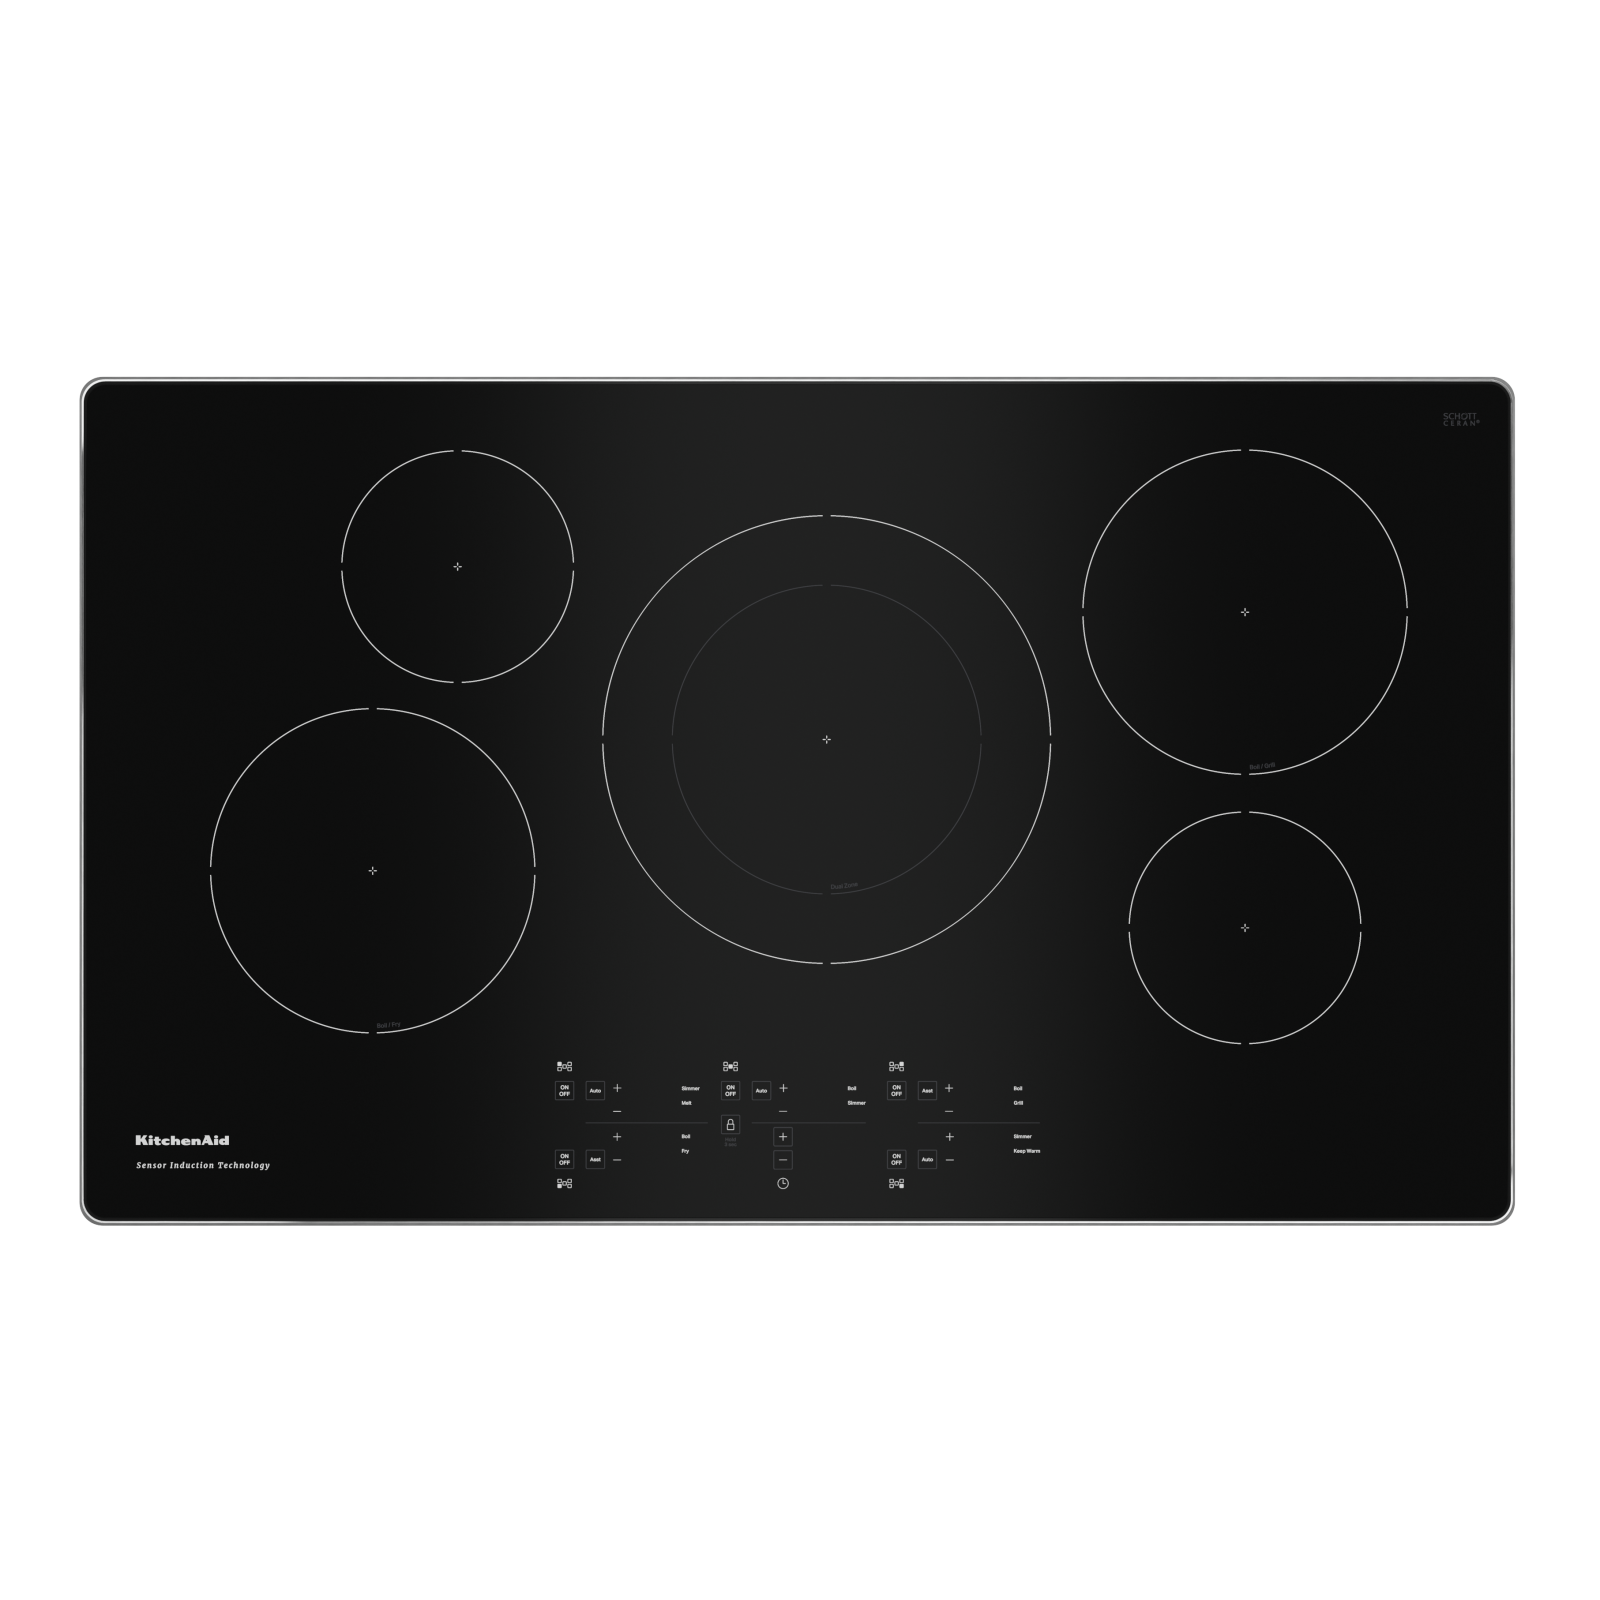 KitchenAid - 36.6875 inch wide Induction Cooktop in Stainless - KCIG556JSS